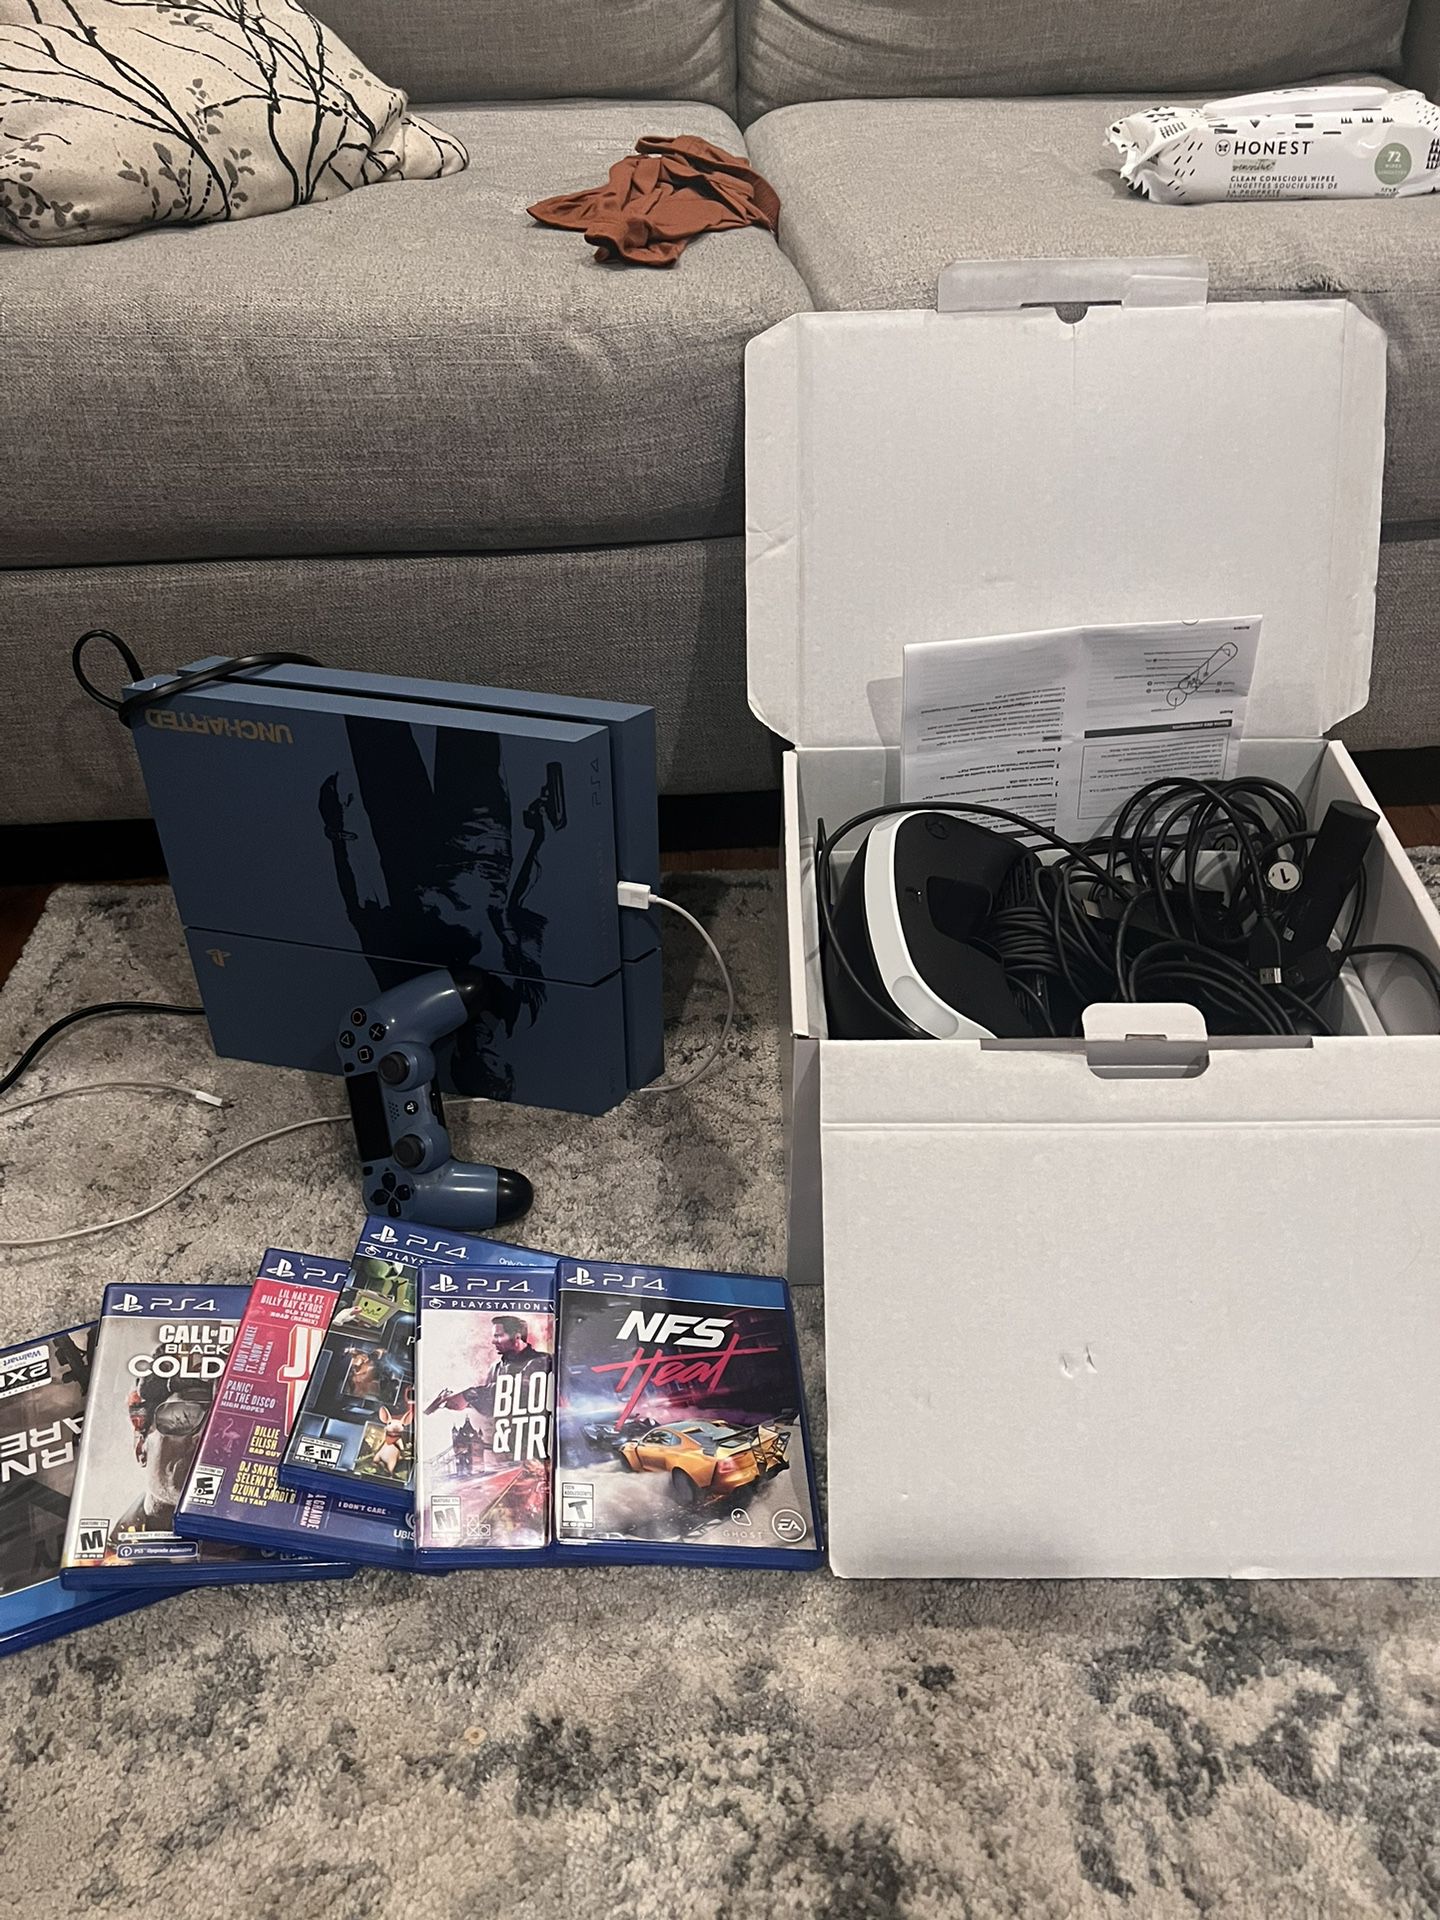 Ps4 Uncharted Edition One Tb Memory Upgrade Games Included One Control And Vr System 